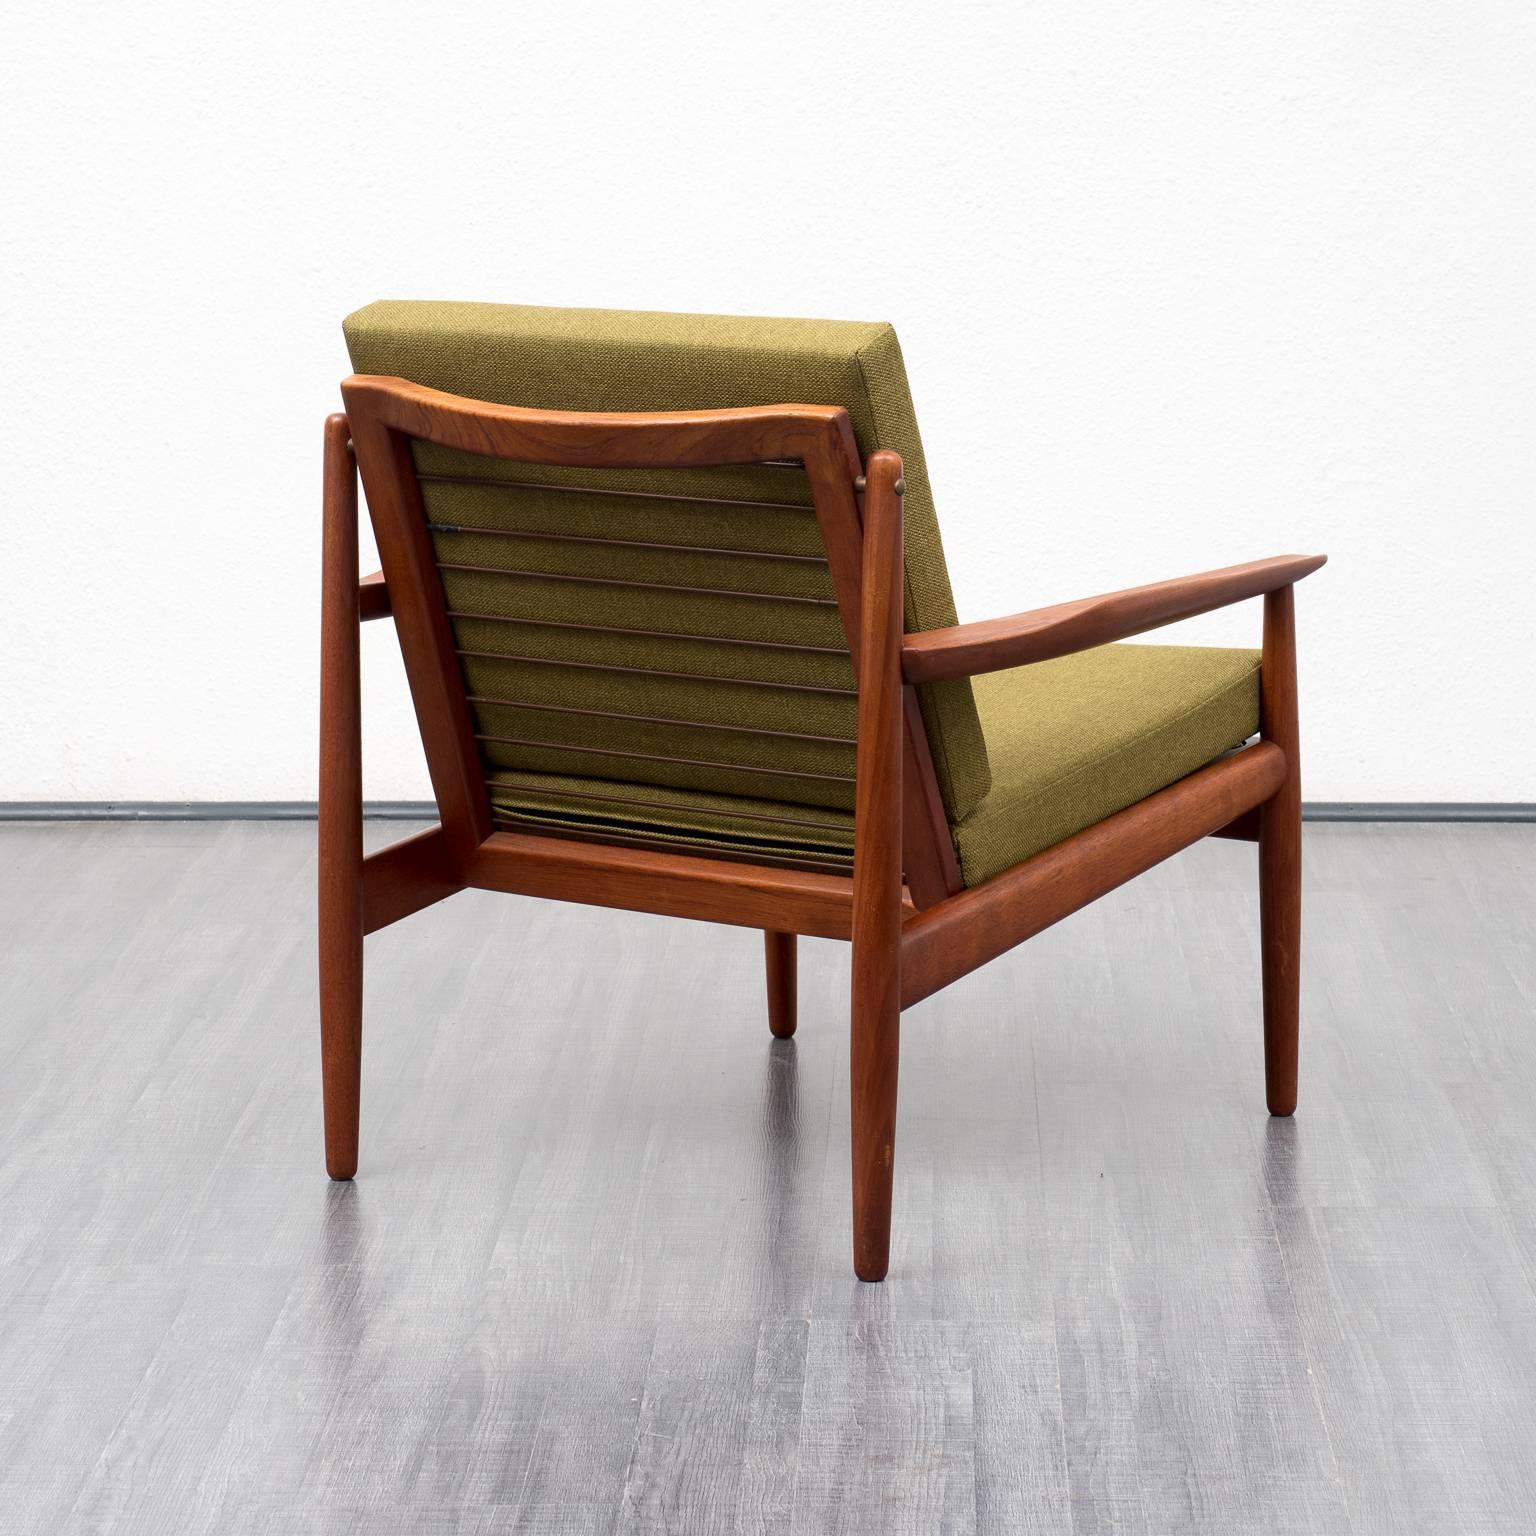 Elegant armchair from the 1960s. Made in Denmark. Design by Arne Vodder for Glostrup, Denmark. Shapely, solid teak wood frame with nice armrests. The armchair was professionally reupholstered and covered with a high-quality green upholstery